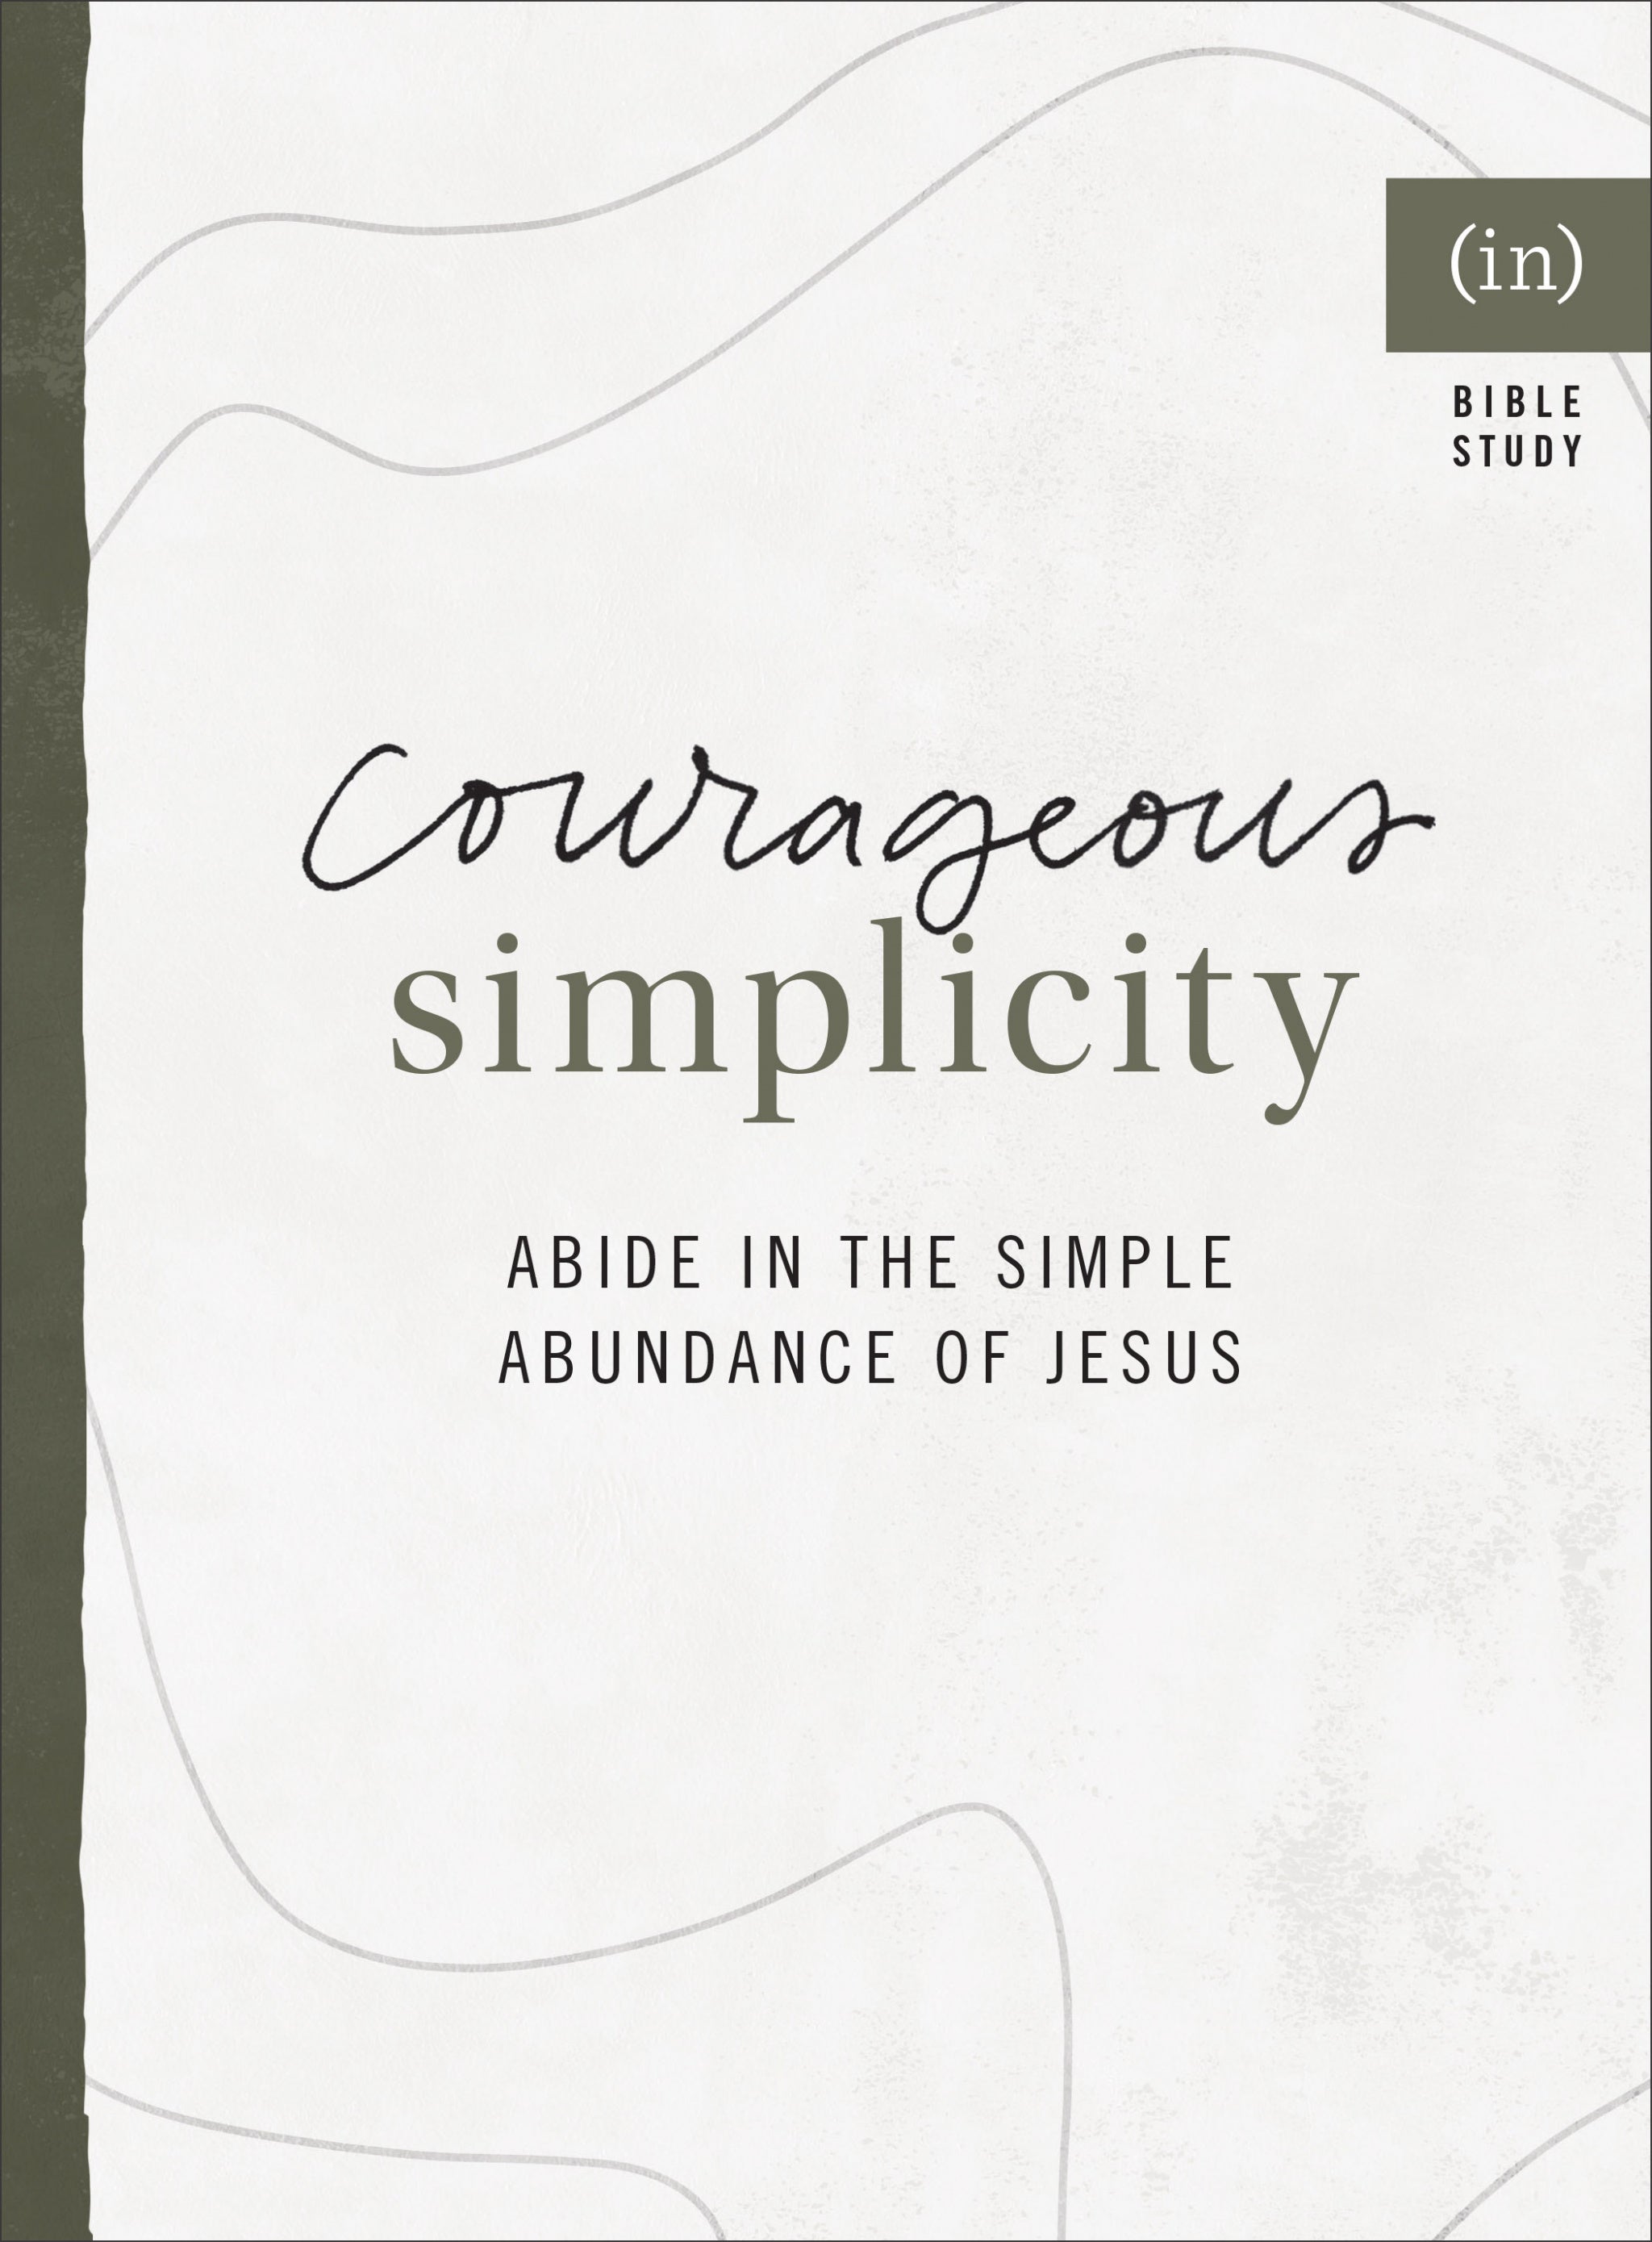 Image of Courageous Simplicity other